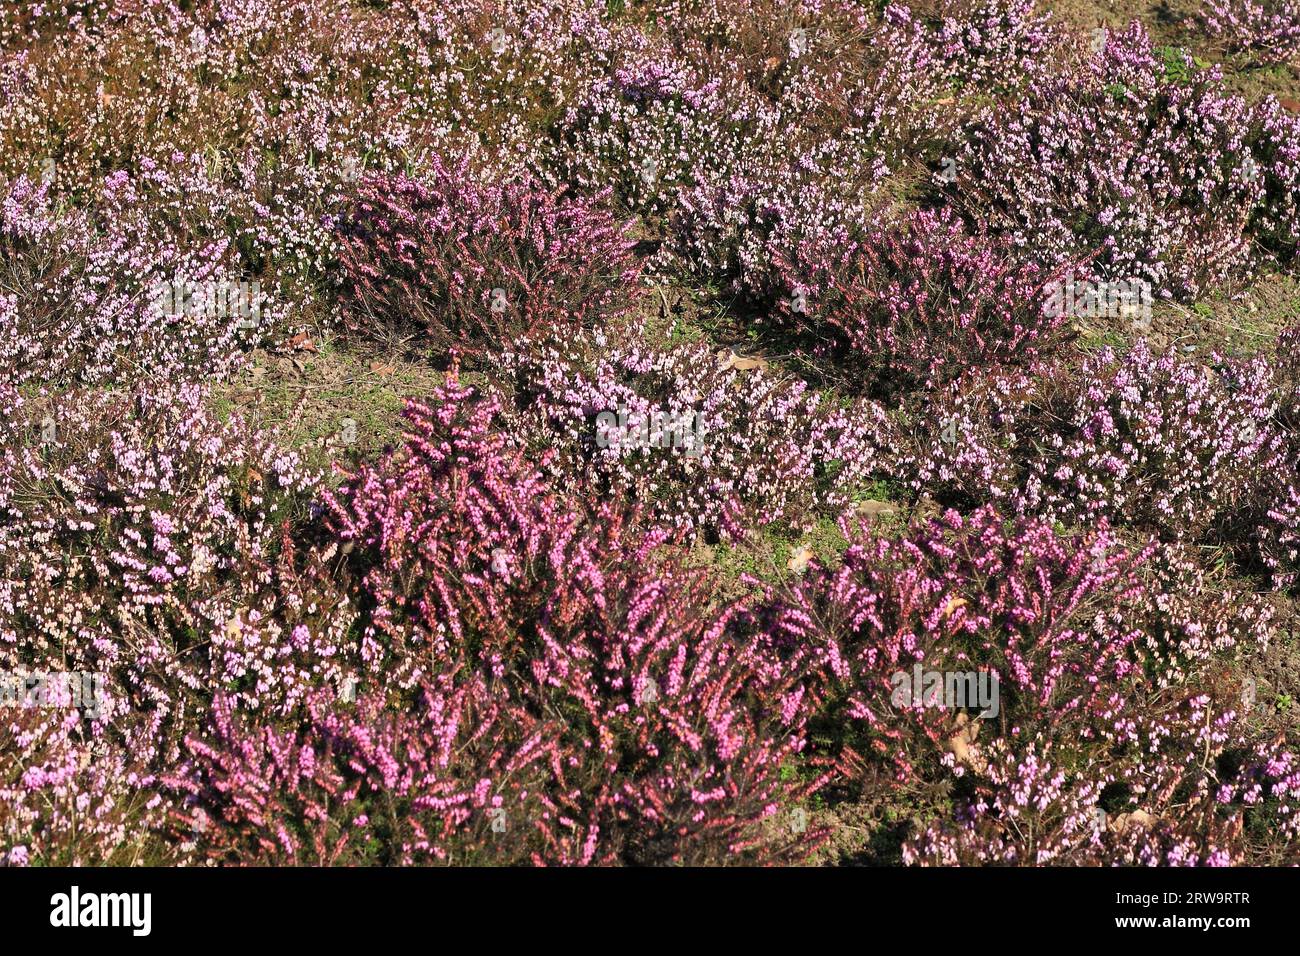 Red heather, photographed full-frame Stock Photo